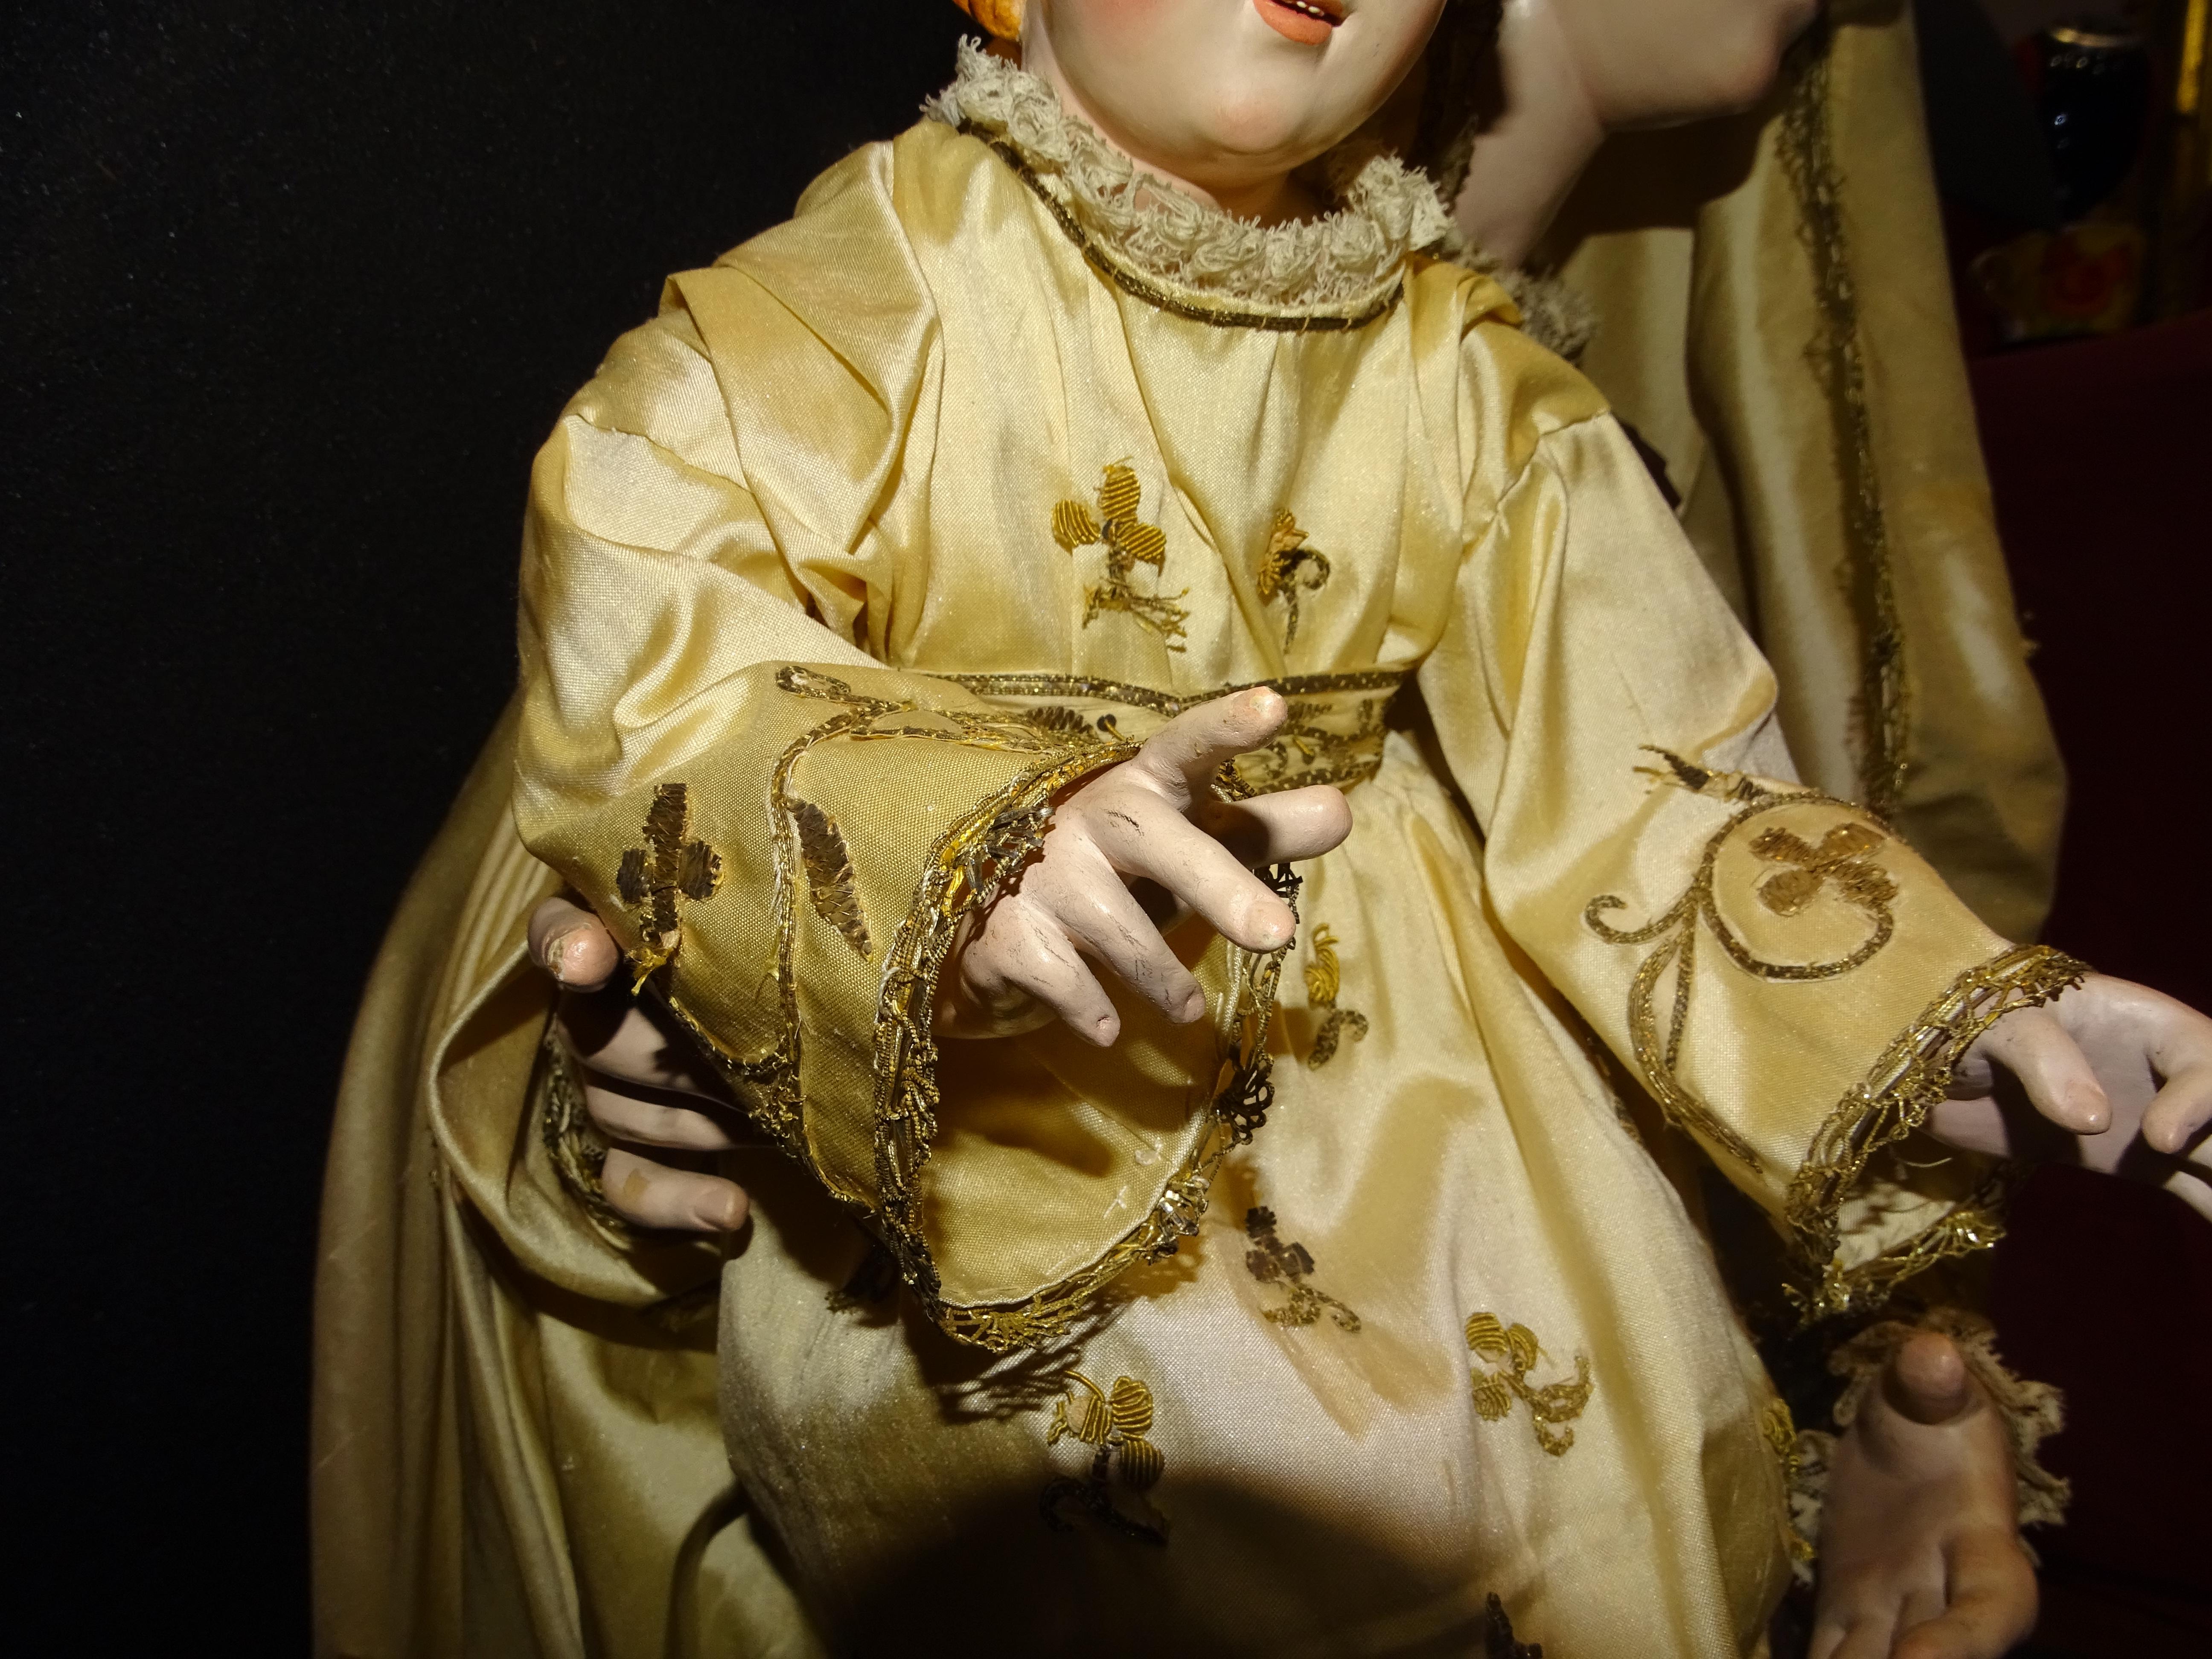 Neapolitan Scupture of a Virgin with the Child Jesus, Nativity 1